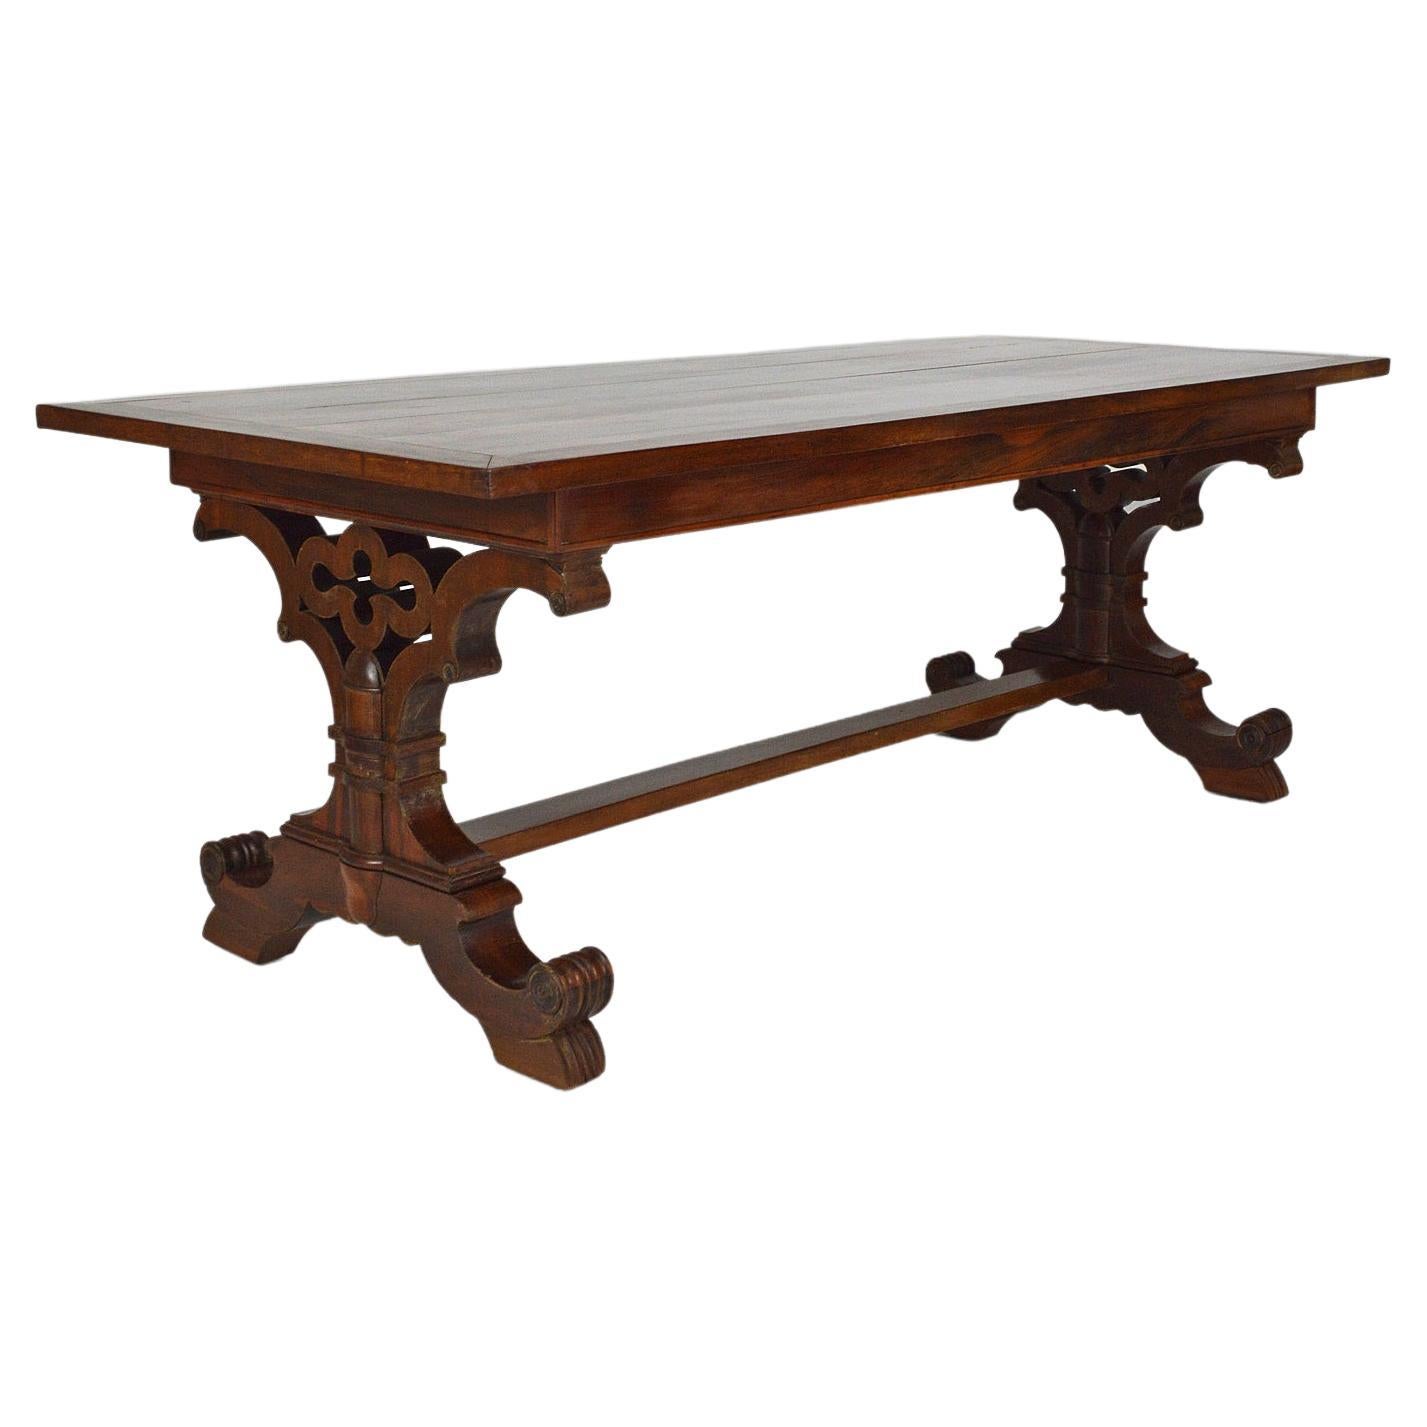 Gothic Revival Dining Table in Mahogany, Victorian Era, circa 1840 For Sale